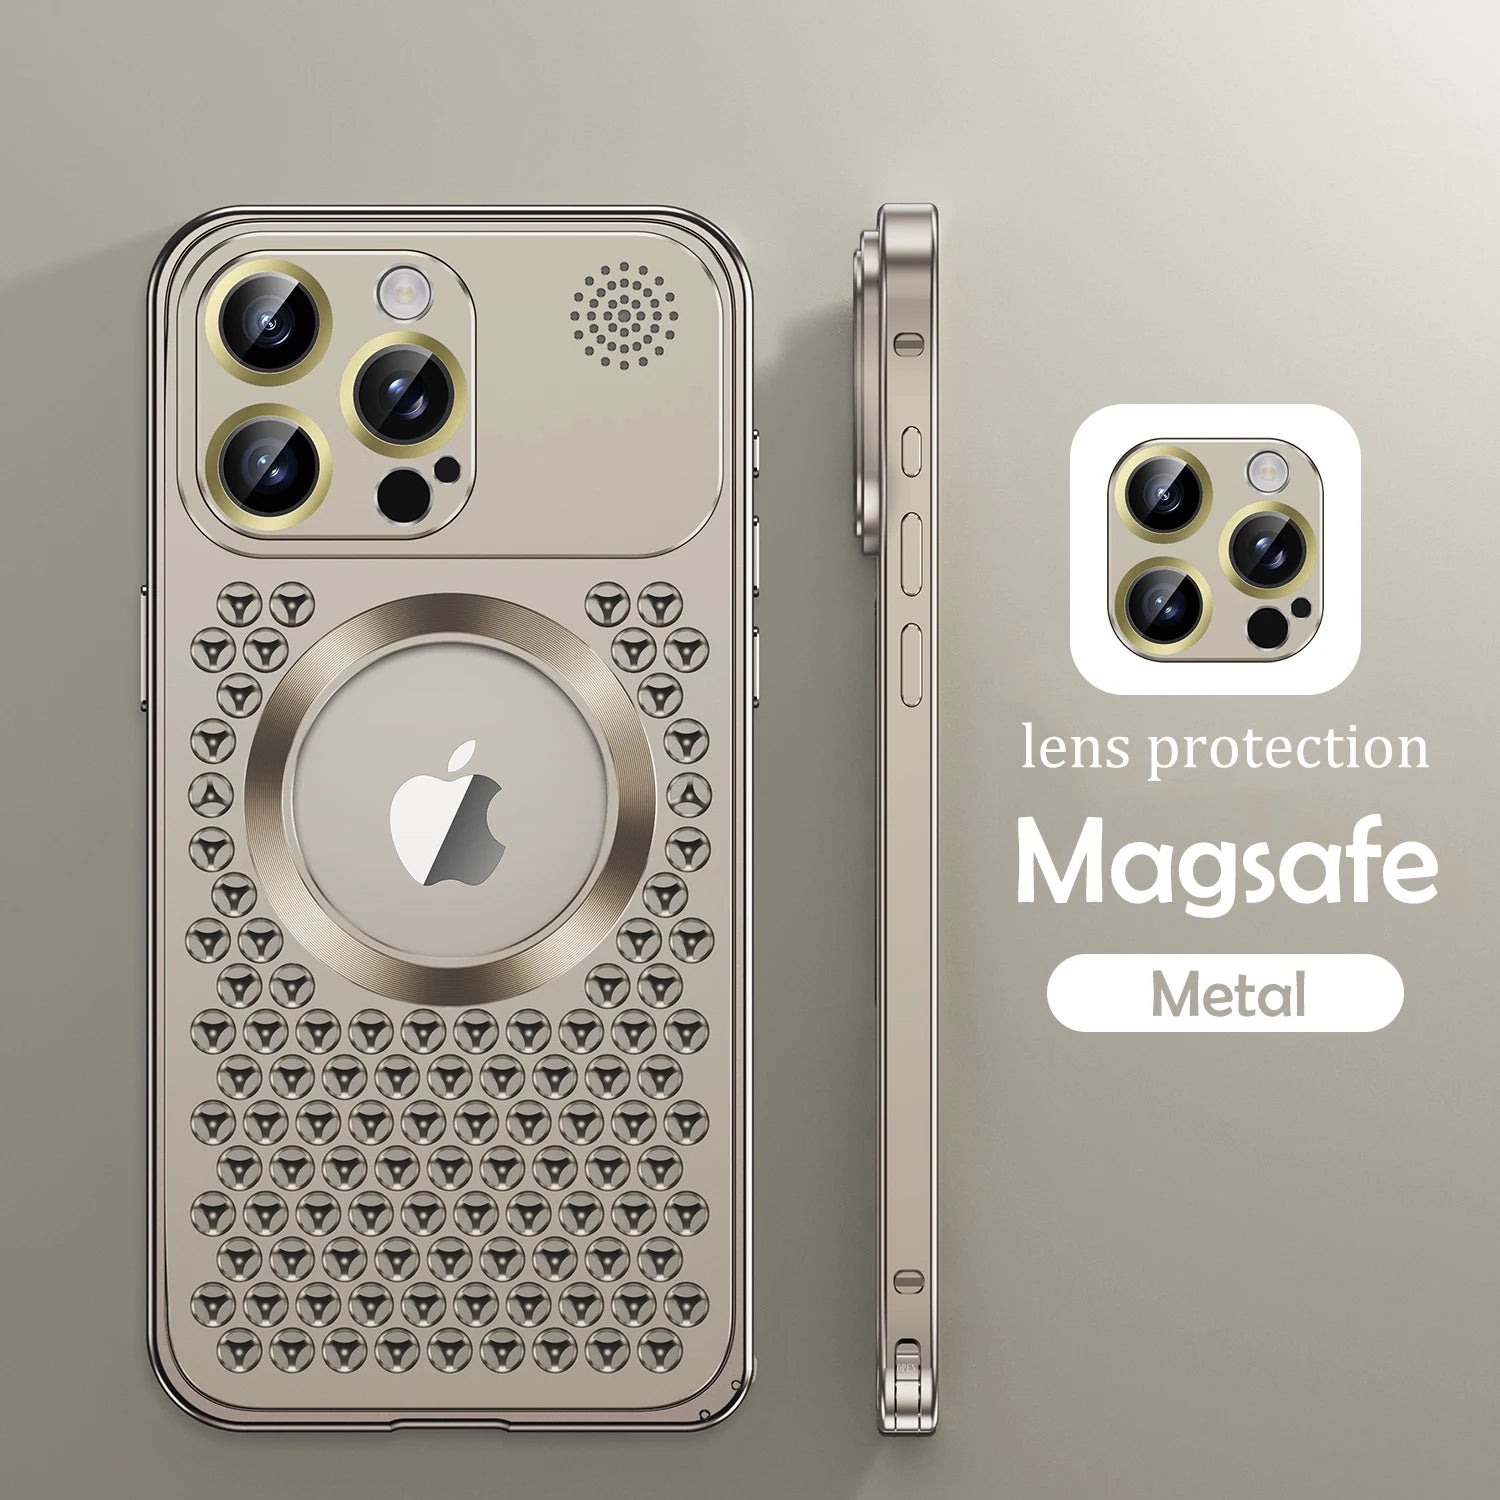 Elite Metal MagSafe Phone Case for iPhone 15/14 Pro Max with Aromatherapy and Lens Film